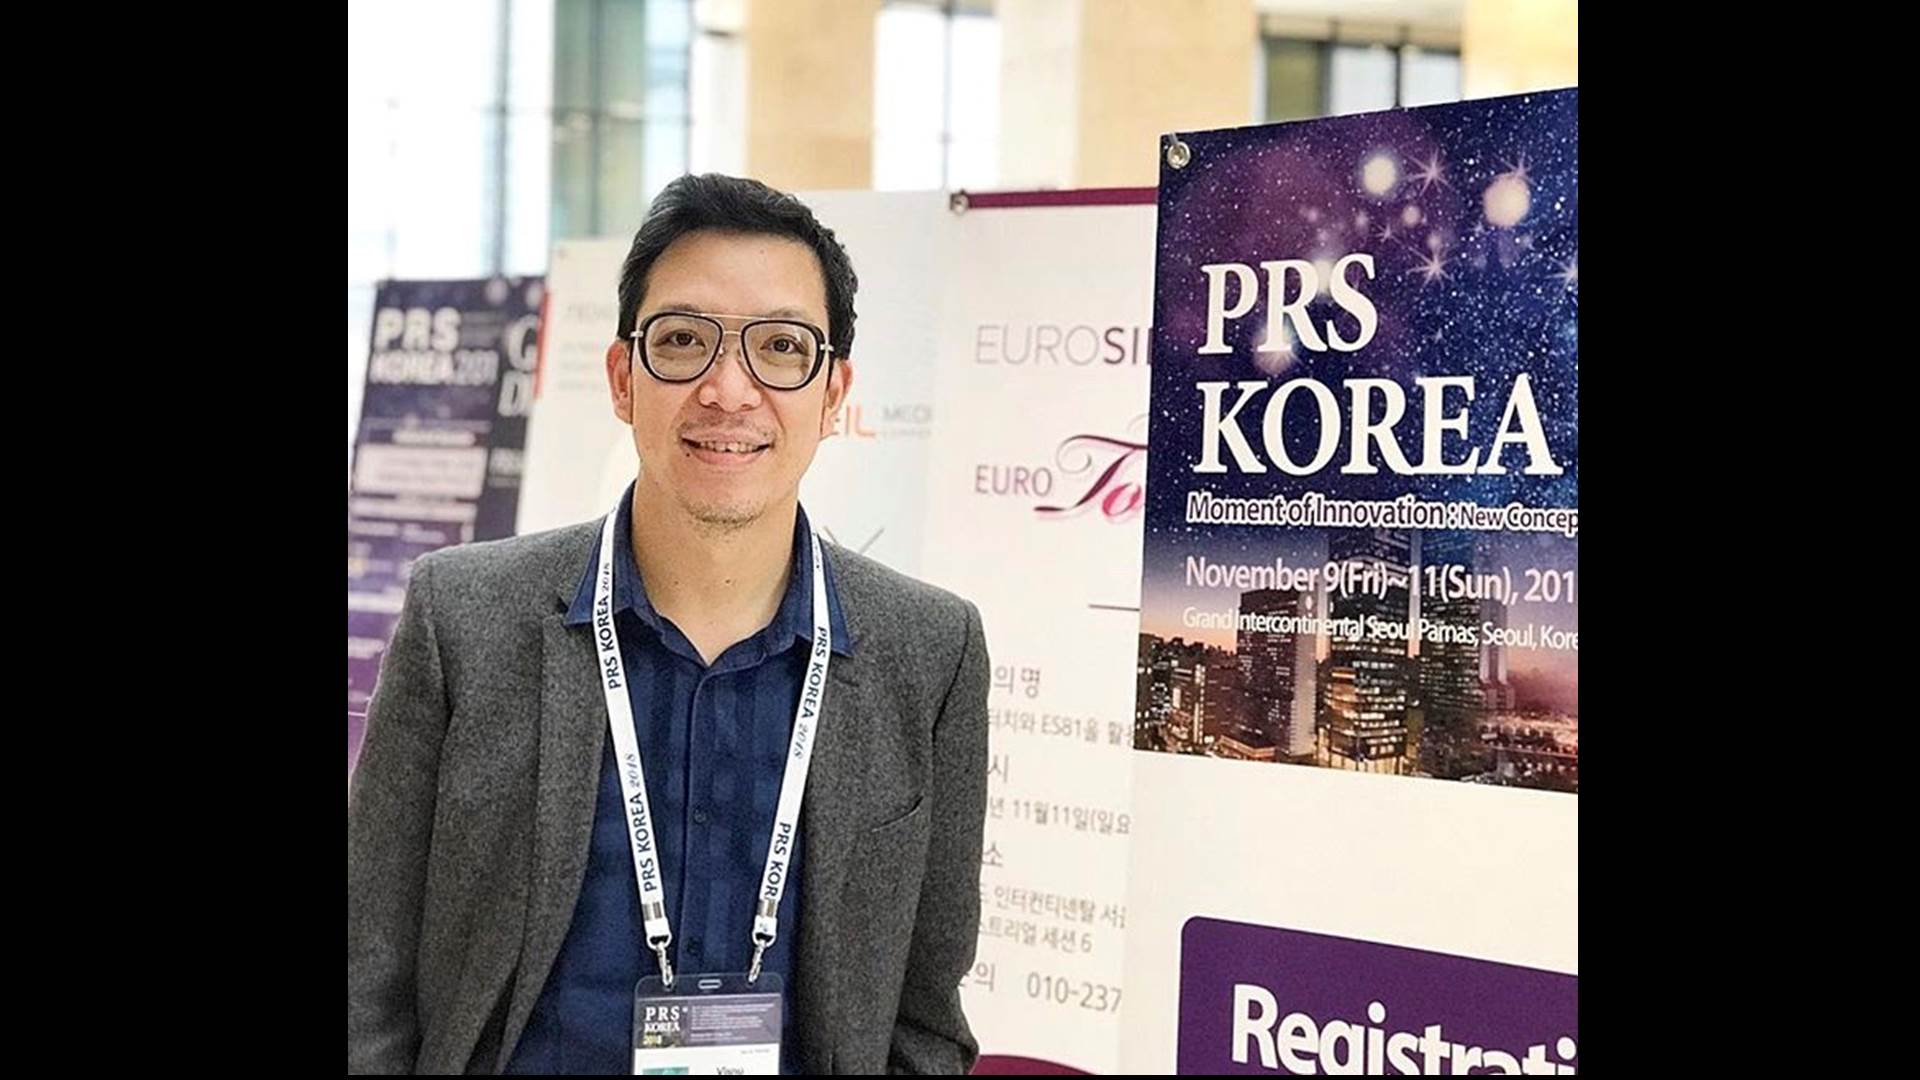 Siriraj Faculty Attended PRS Korea 2018: Moment of Innovation, the International Confederation of Plastic Surgery Societies